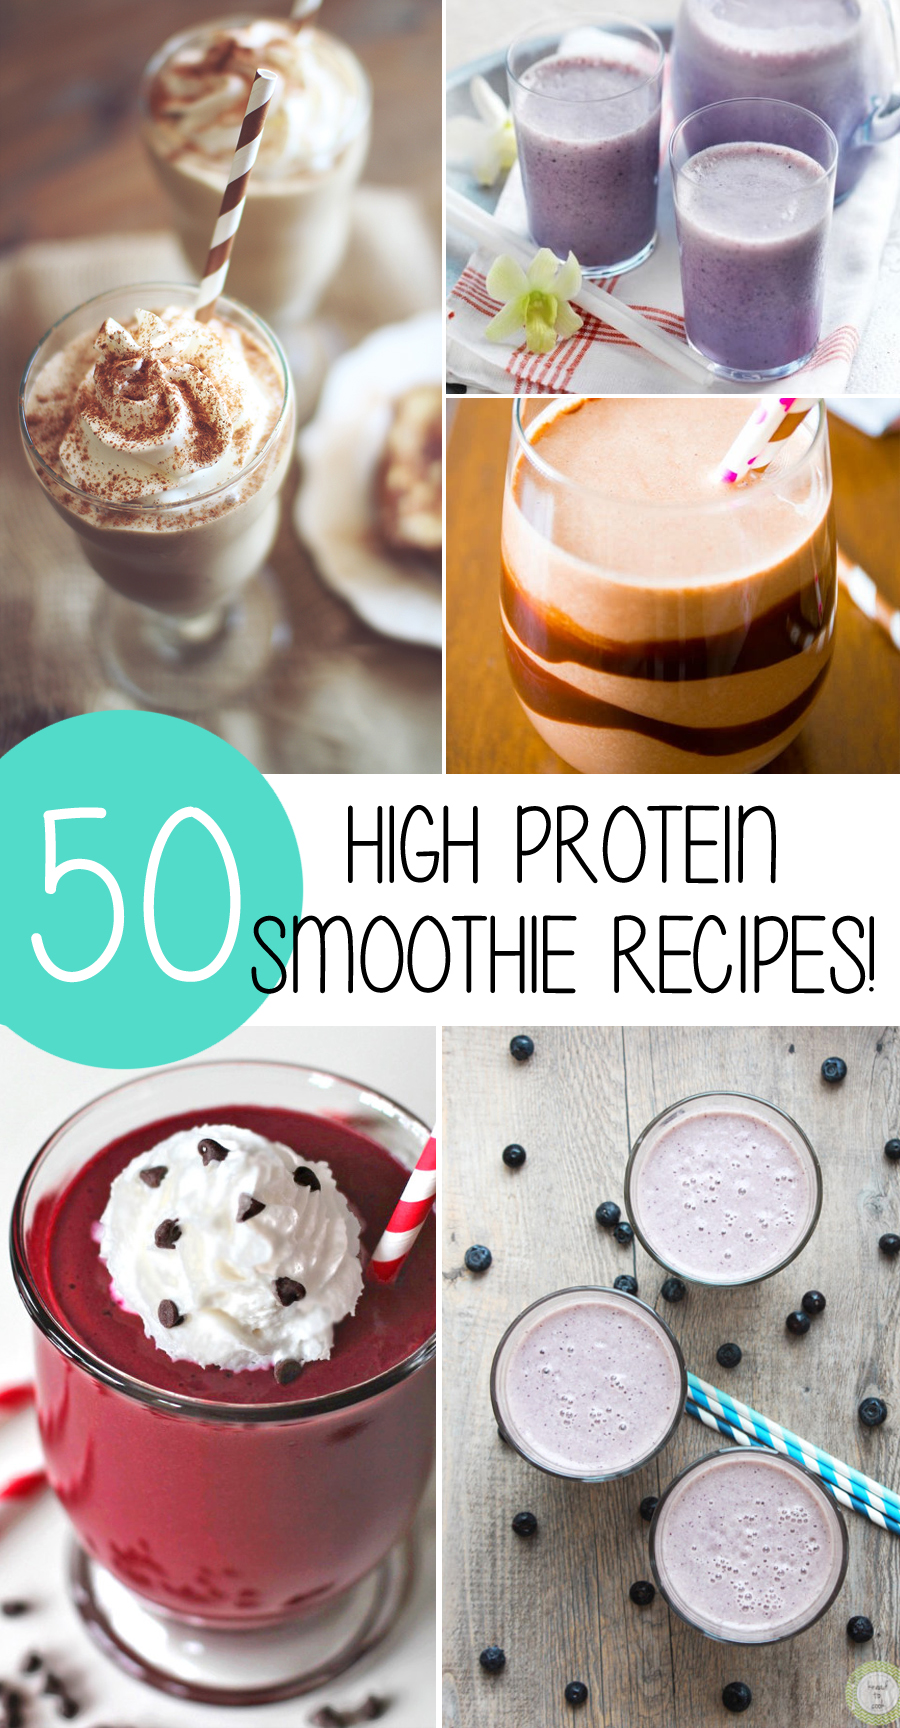 https://www.trimmedandtoned.com/wp-content/uploads/2014/11/50-High-Protein-Smoothie-Recipes.jpg